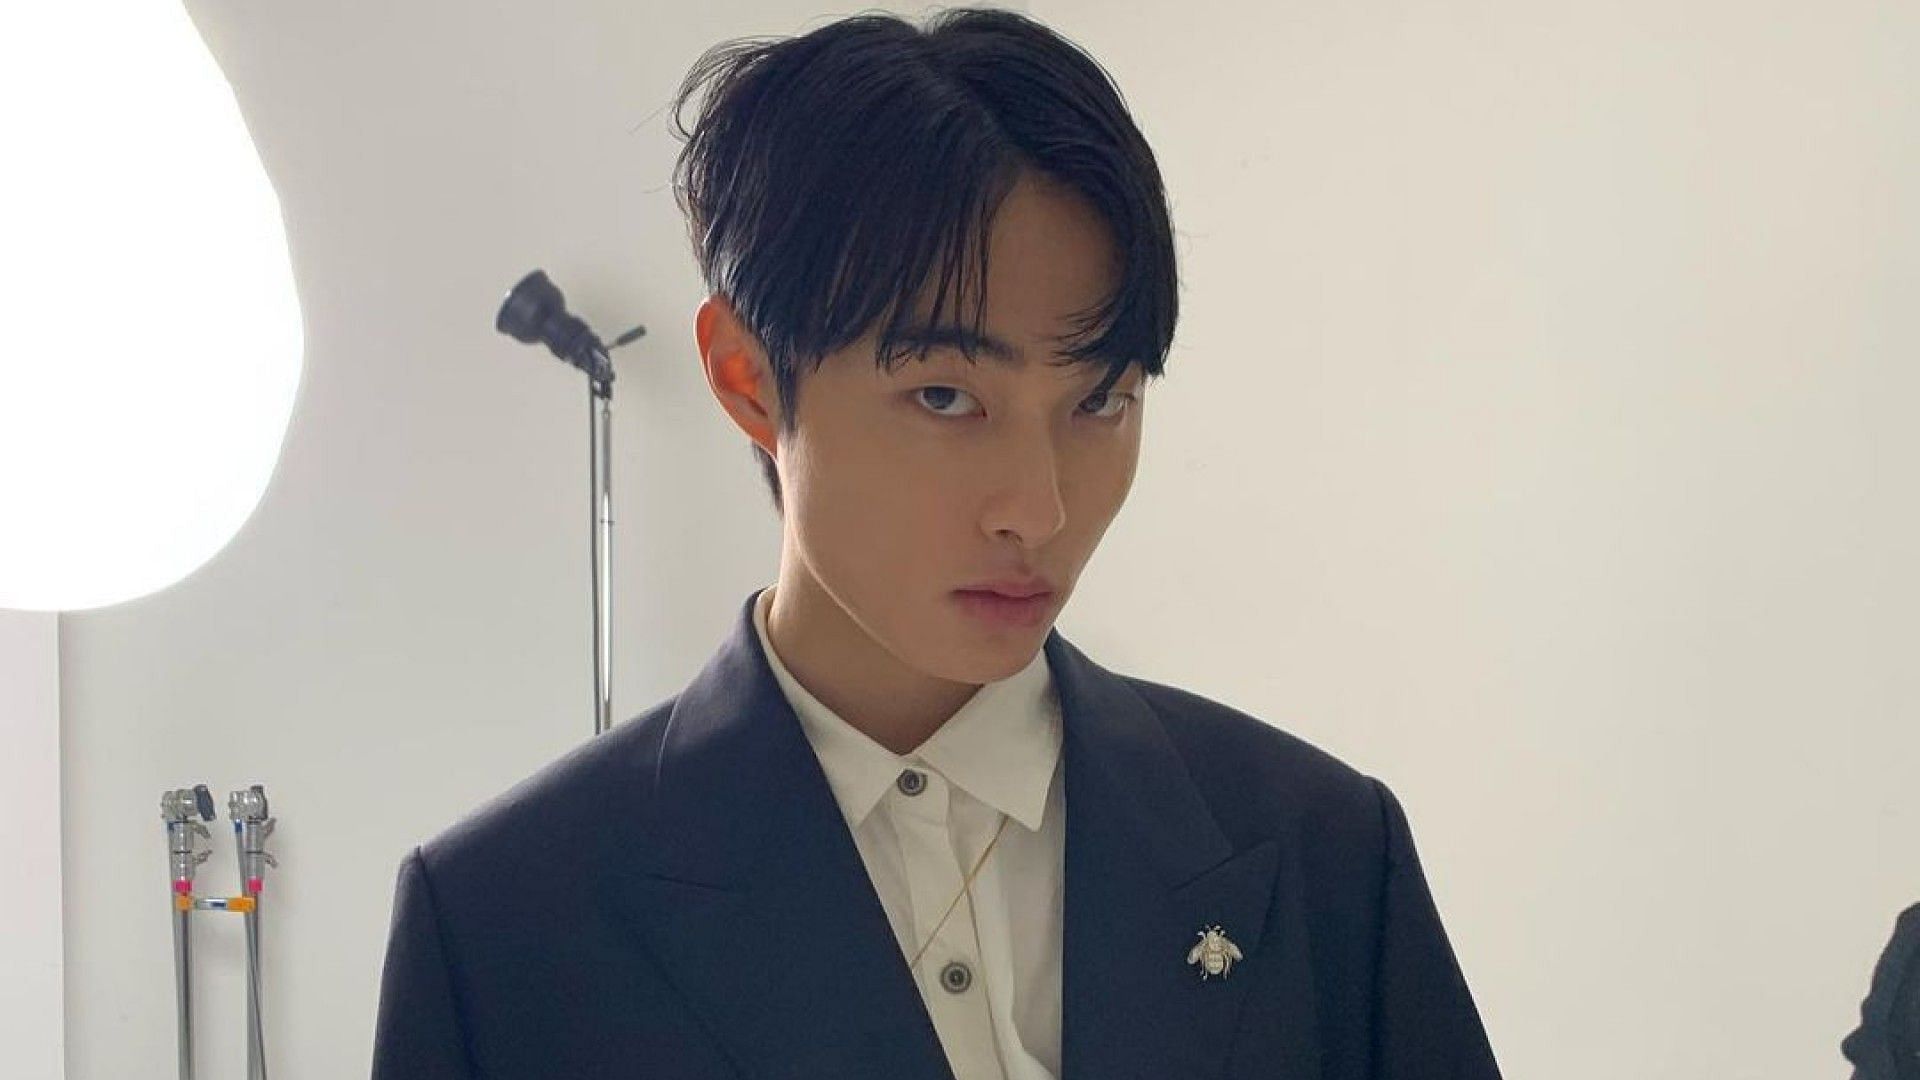 Yoon Chan-young&#039;s character will becoming an unwilling chess piece in a crime (Image via Instagram/yooncy1)